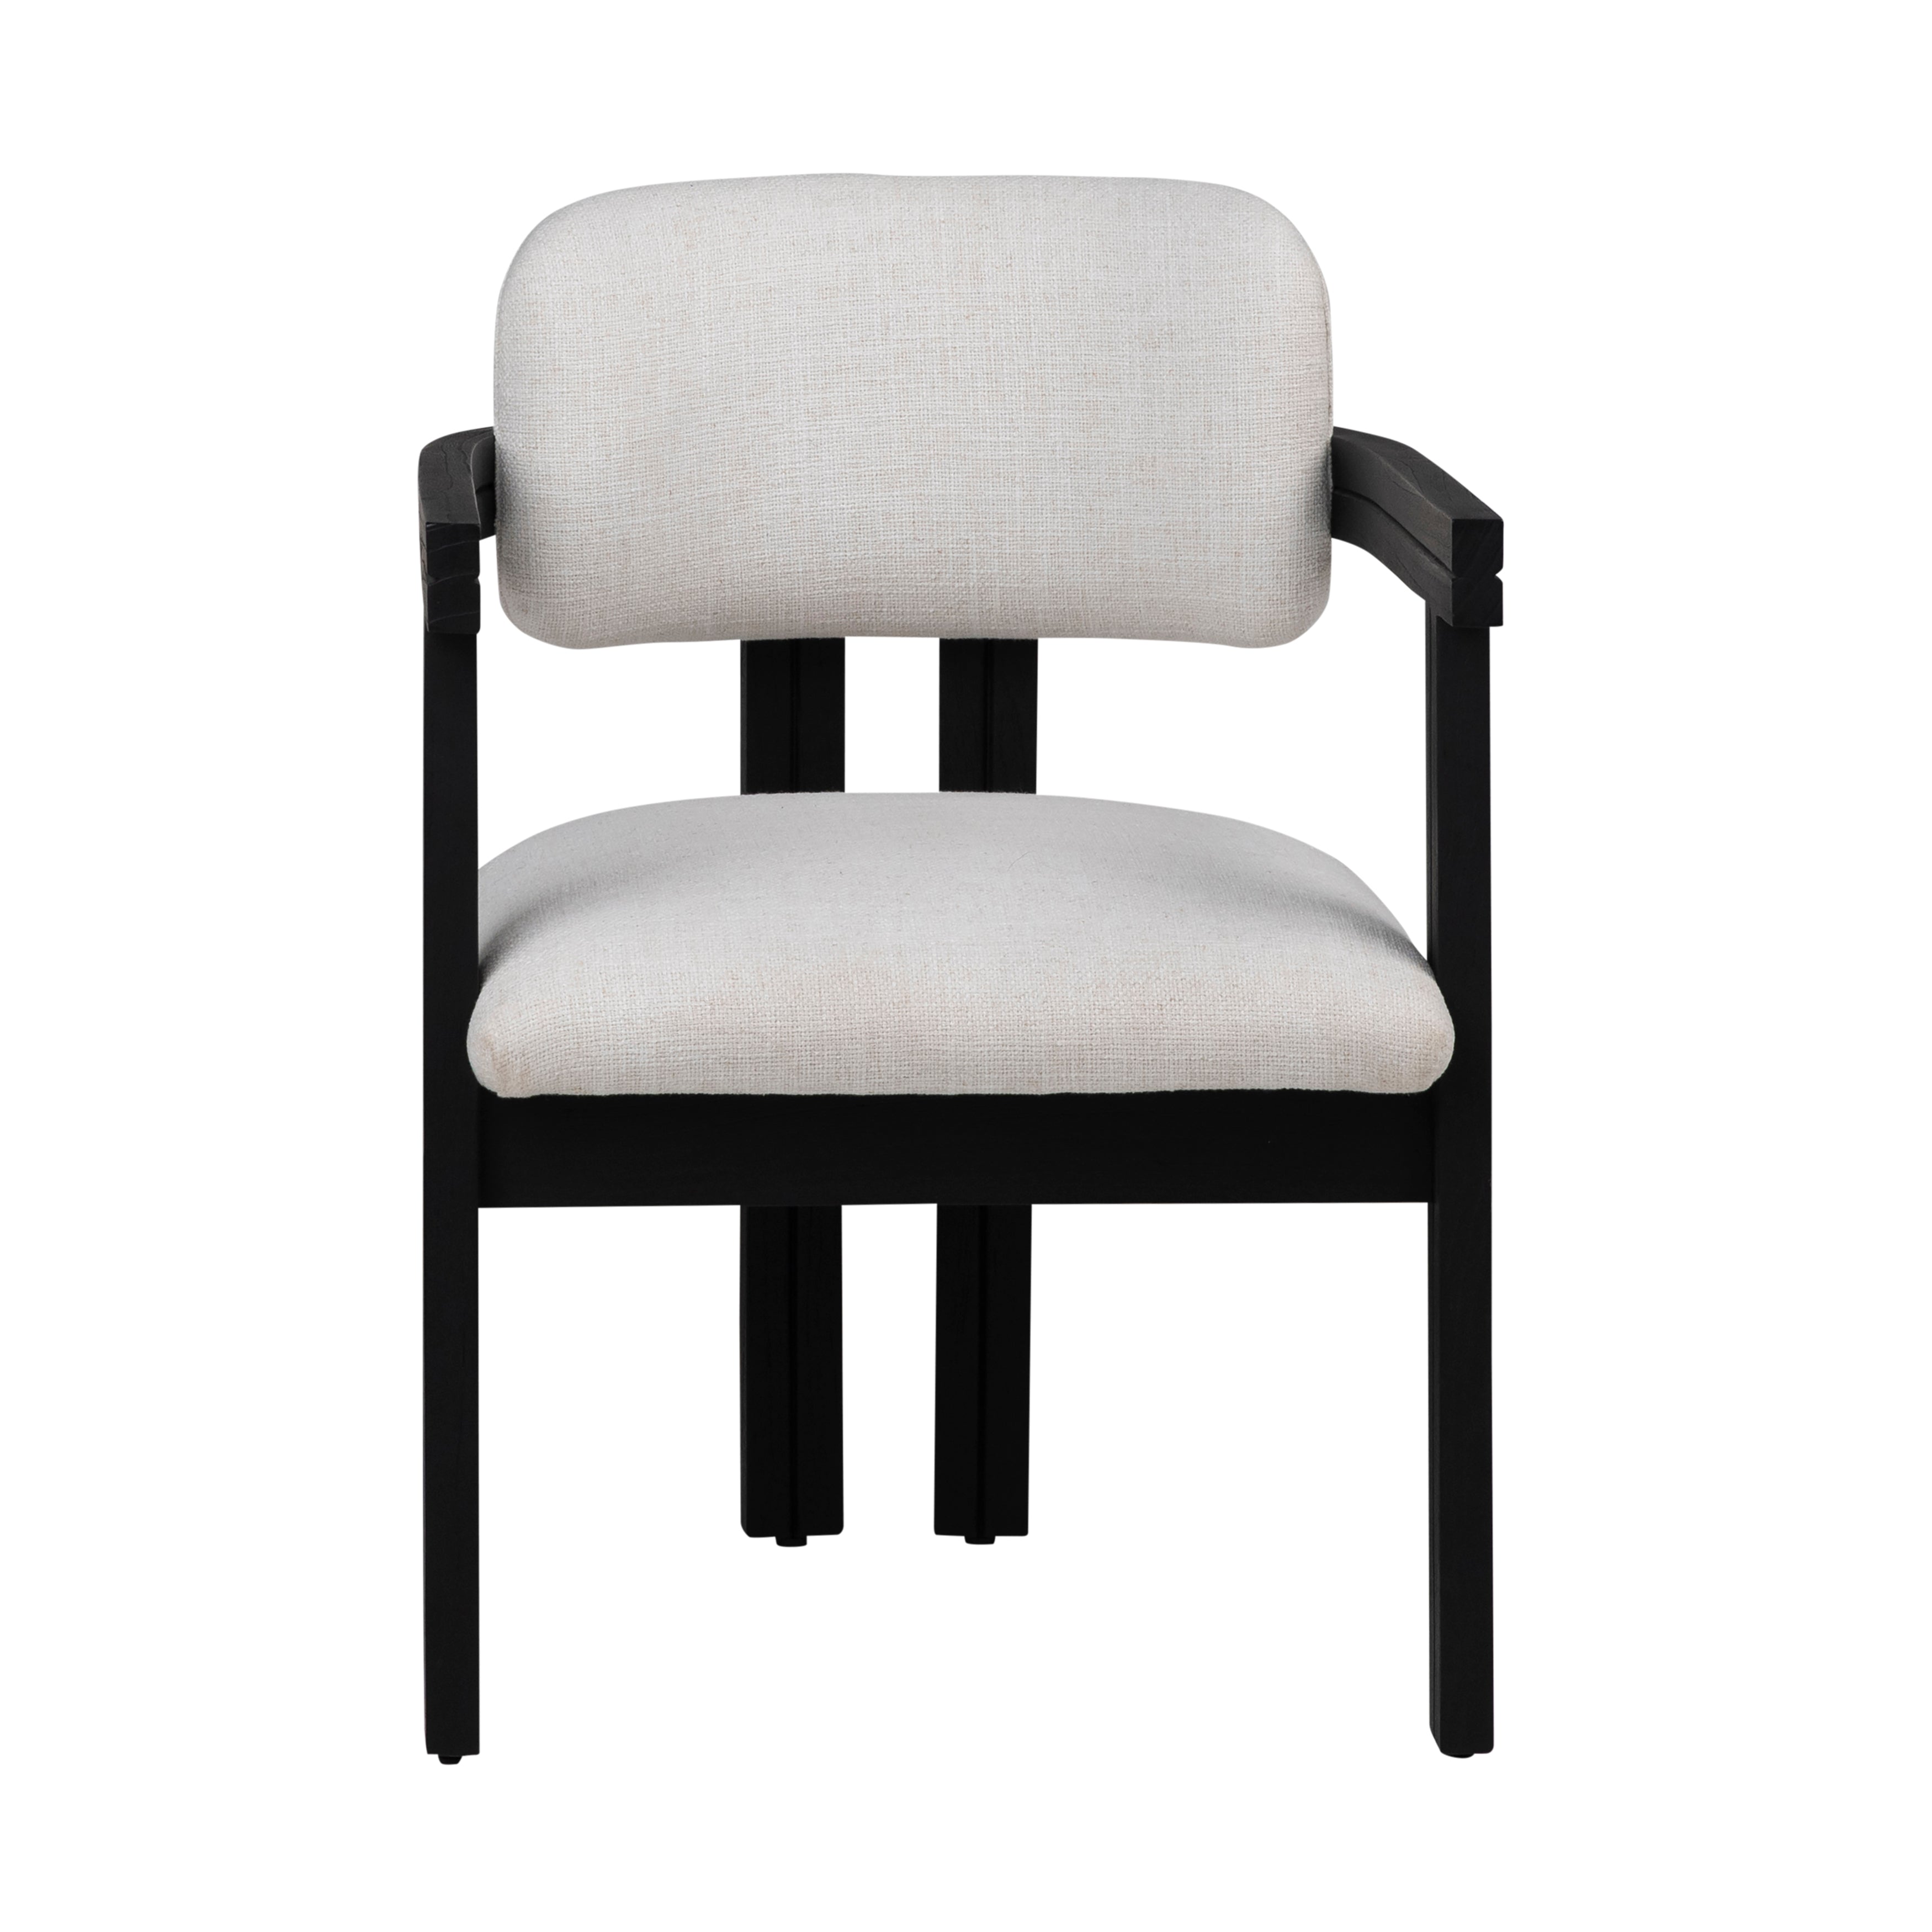 Experience the harmonious fusion of classic style and contemporary materials with our Nathaniel Dining Chair. Its black mindi wood frame seamlessly complements the uniquely textured off-white poly blend upholstery, creating a visually stunning combination. Amethyst Home provides interior design, new home construction design consulting, vintage area rugs, and lighting in the Washington metro area.